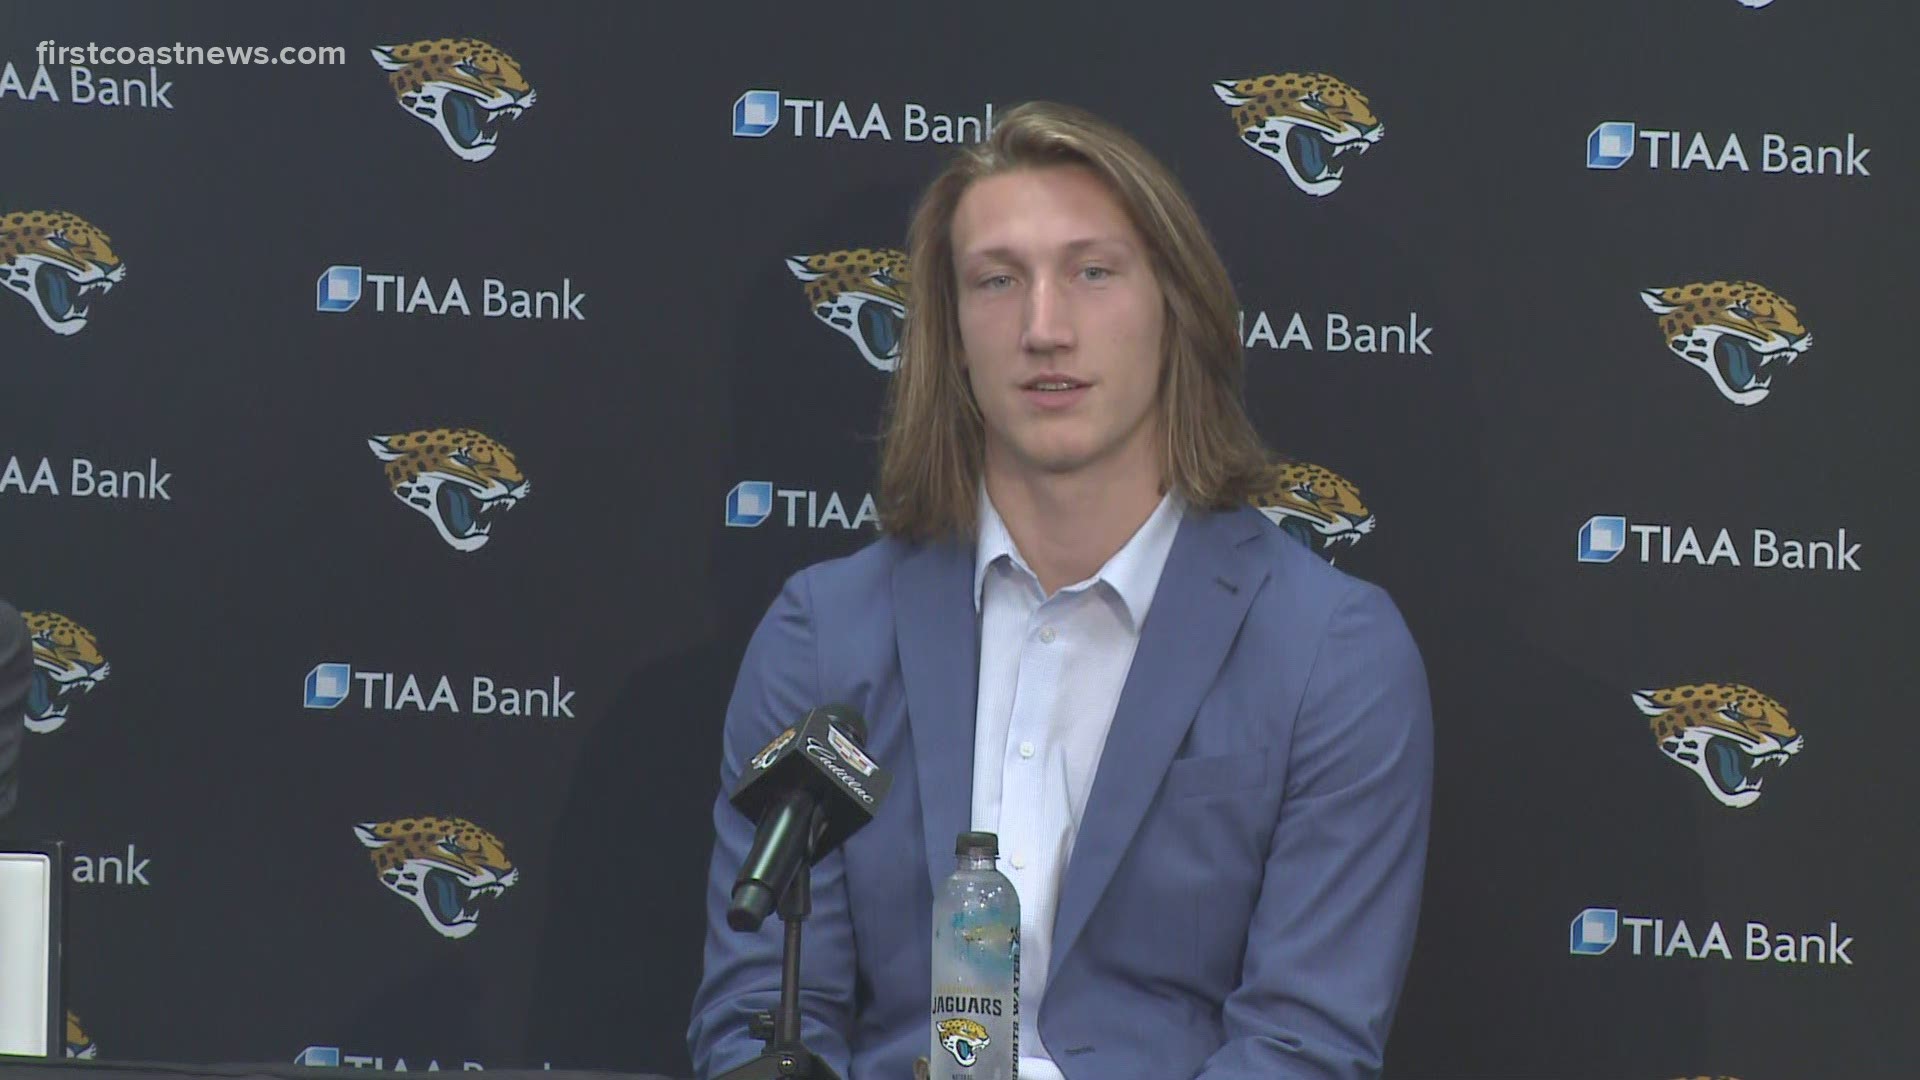 Trevor Lawrence appeared in his first news conference as the Jacksonville Jaguars quarterback Friday.